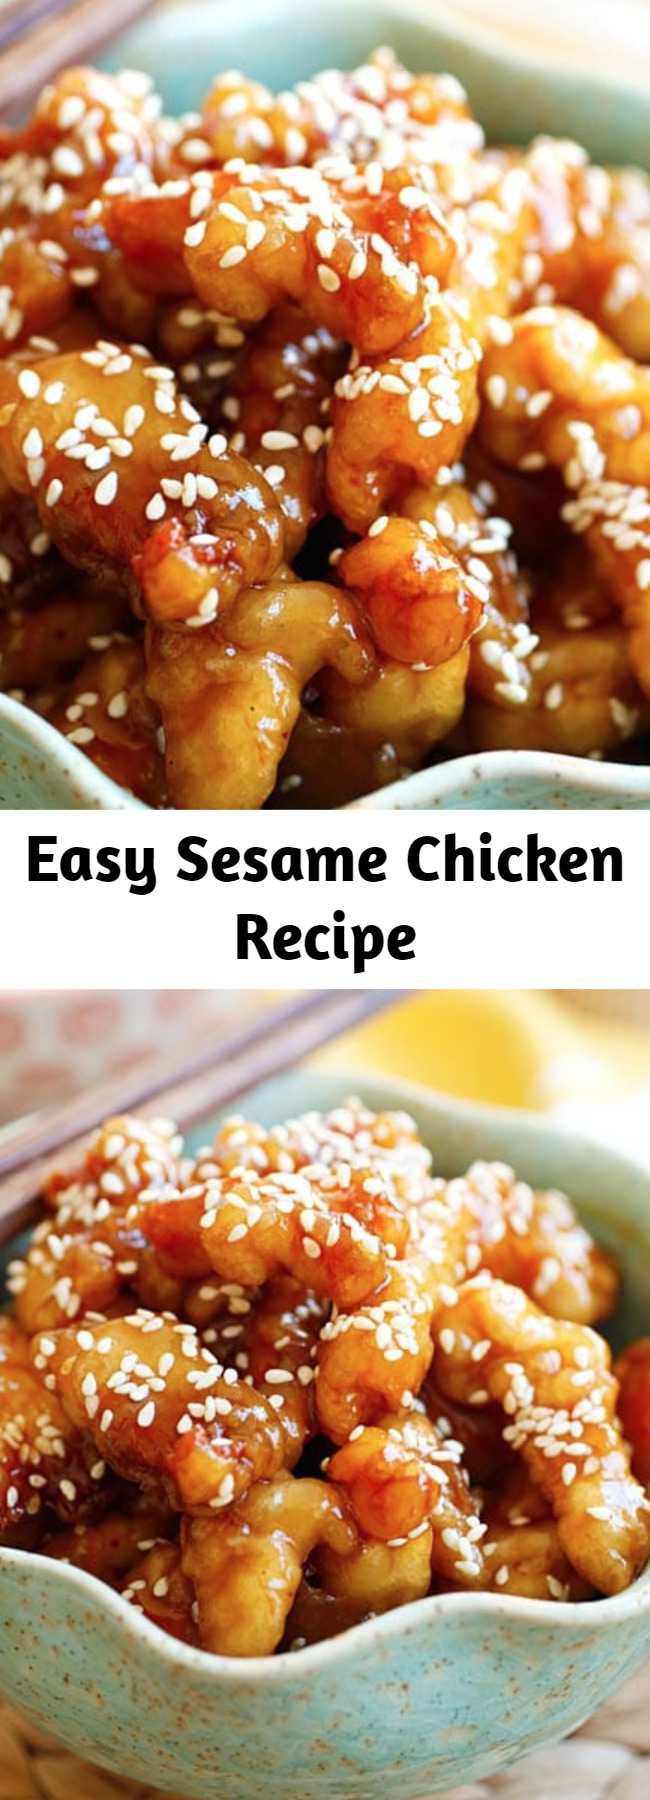 Easy Sesame Chicken Recipe - This is the best Sesame Chicken recipe with crispy chicken in sweet and savory sesame chicken sauce. It tastes just like Chinese restaurants and takes only 20 mins to make. Serve the chicken with steamed rice for an authentic homemade Chinese meal. #chinesefood #chicken